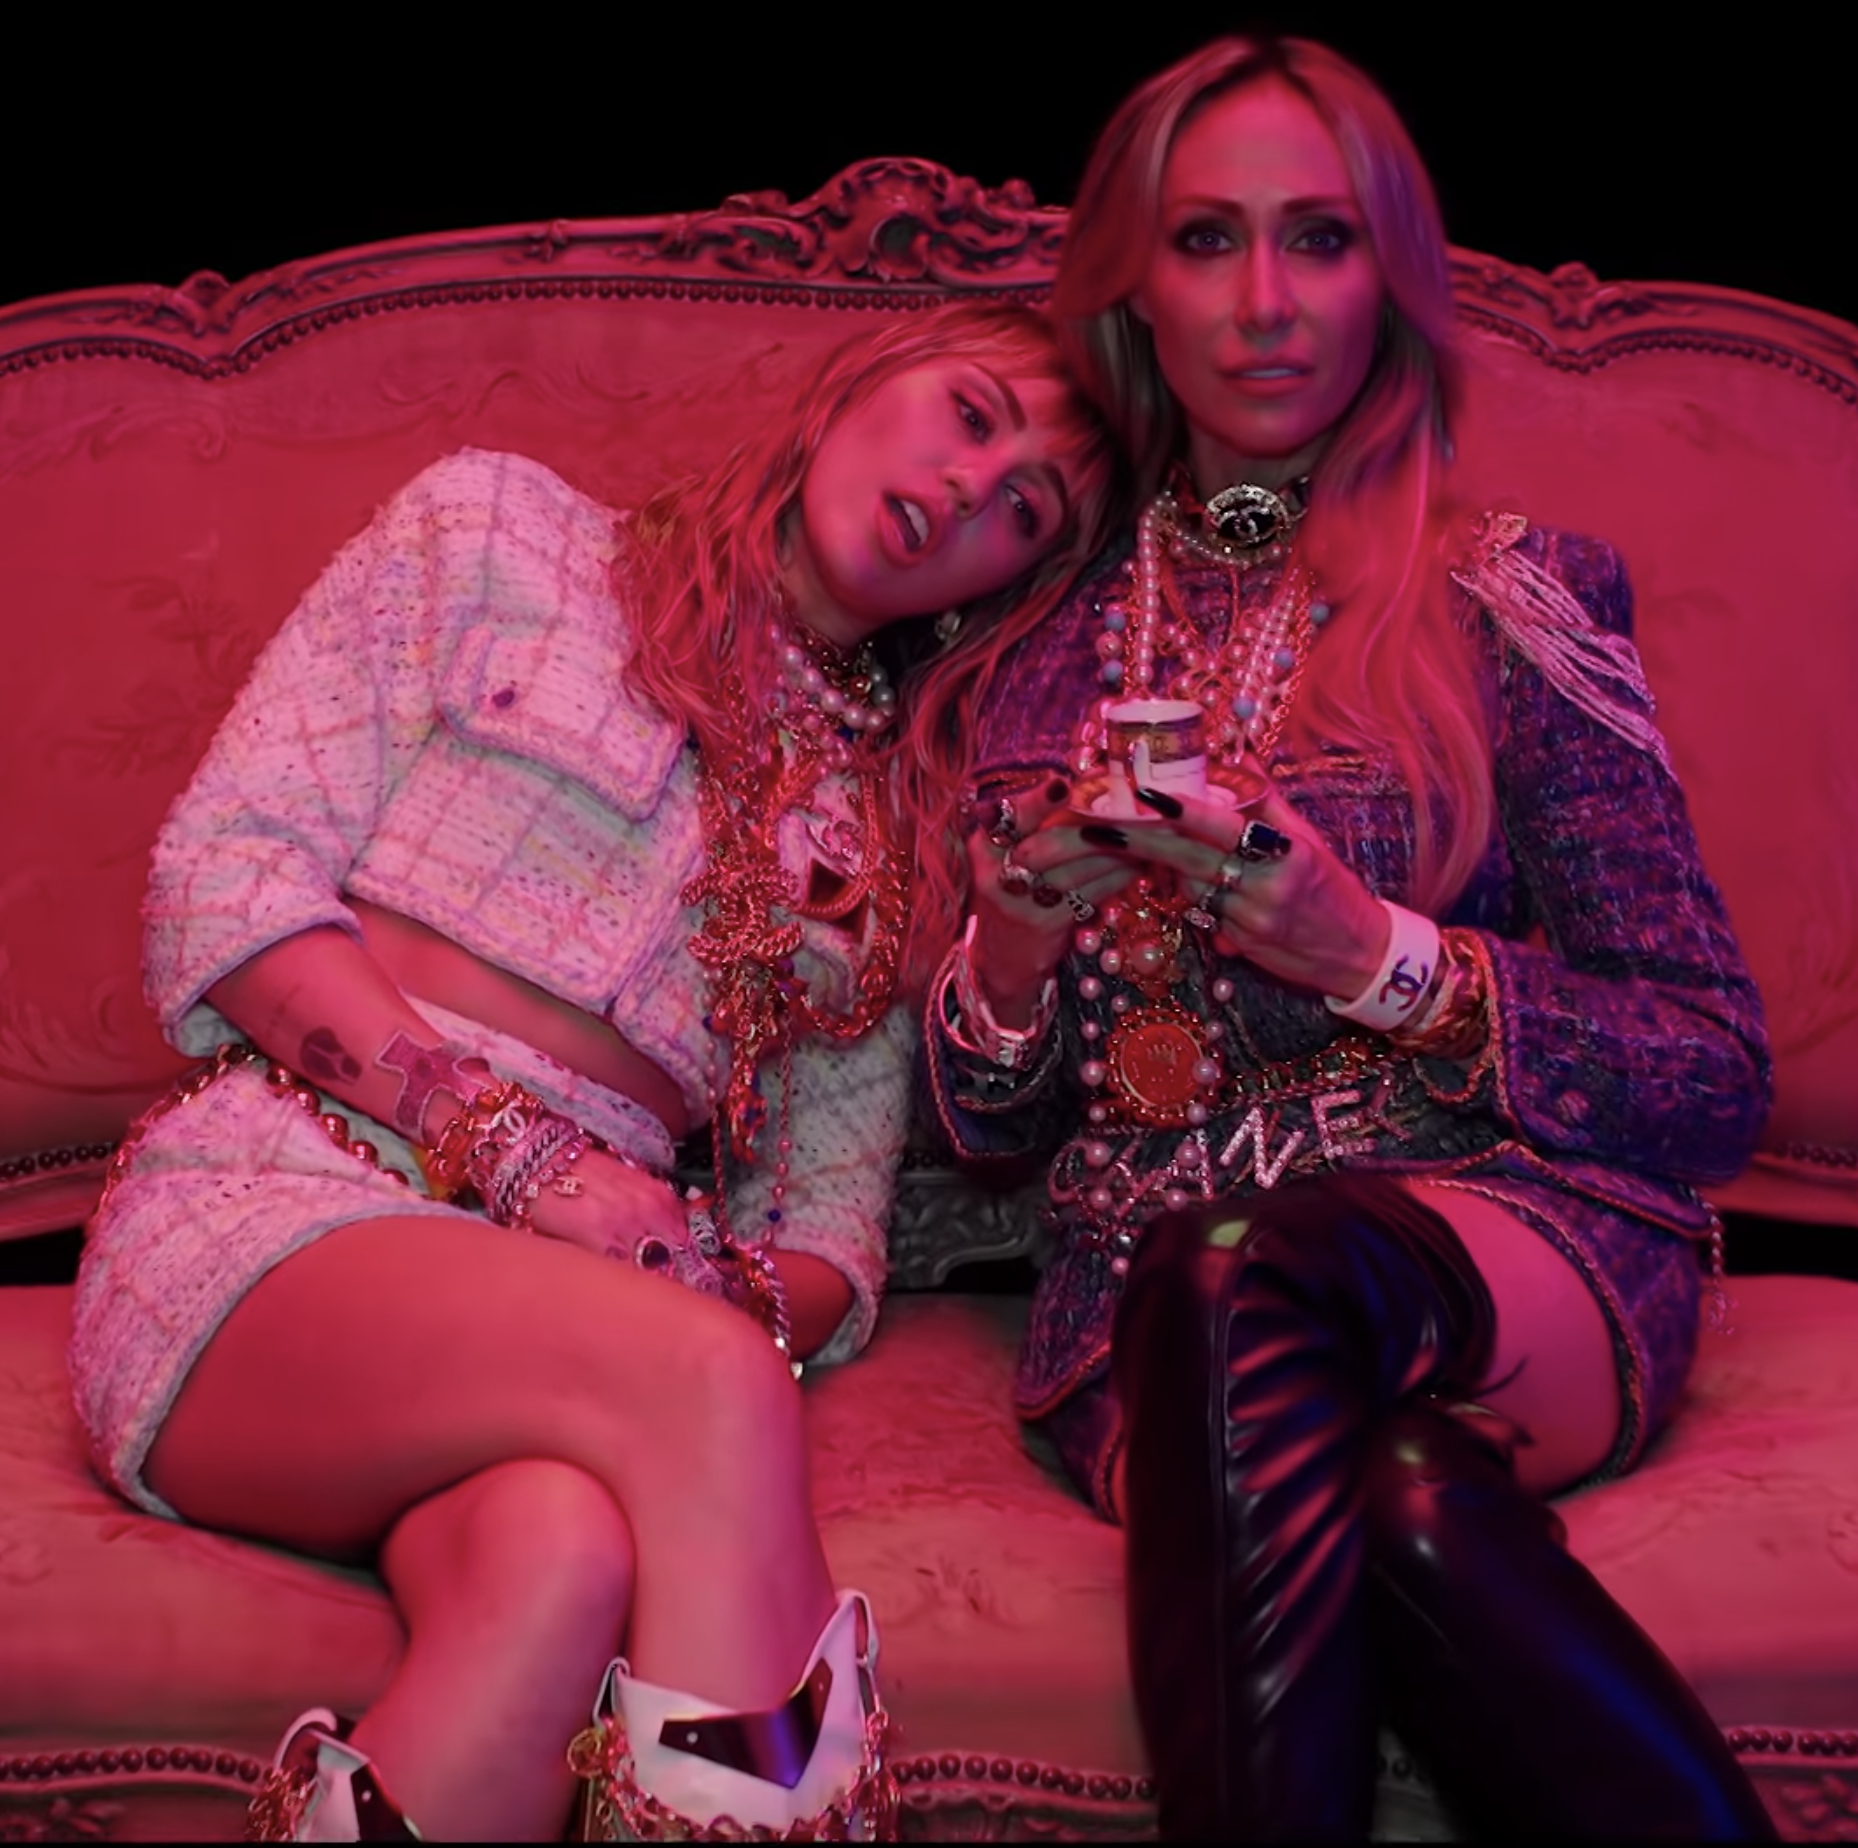 Miley Cyrus’s ‘Mother’s Daughter’ Music Video Is One Big Political Statement